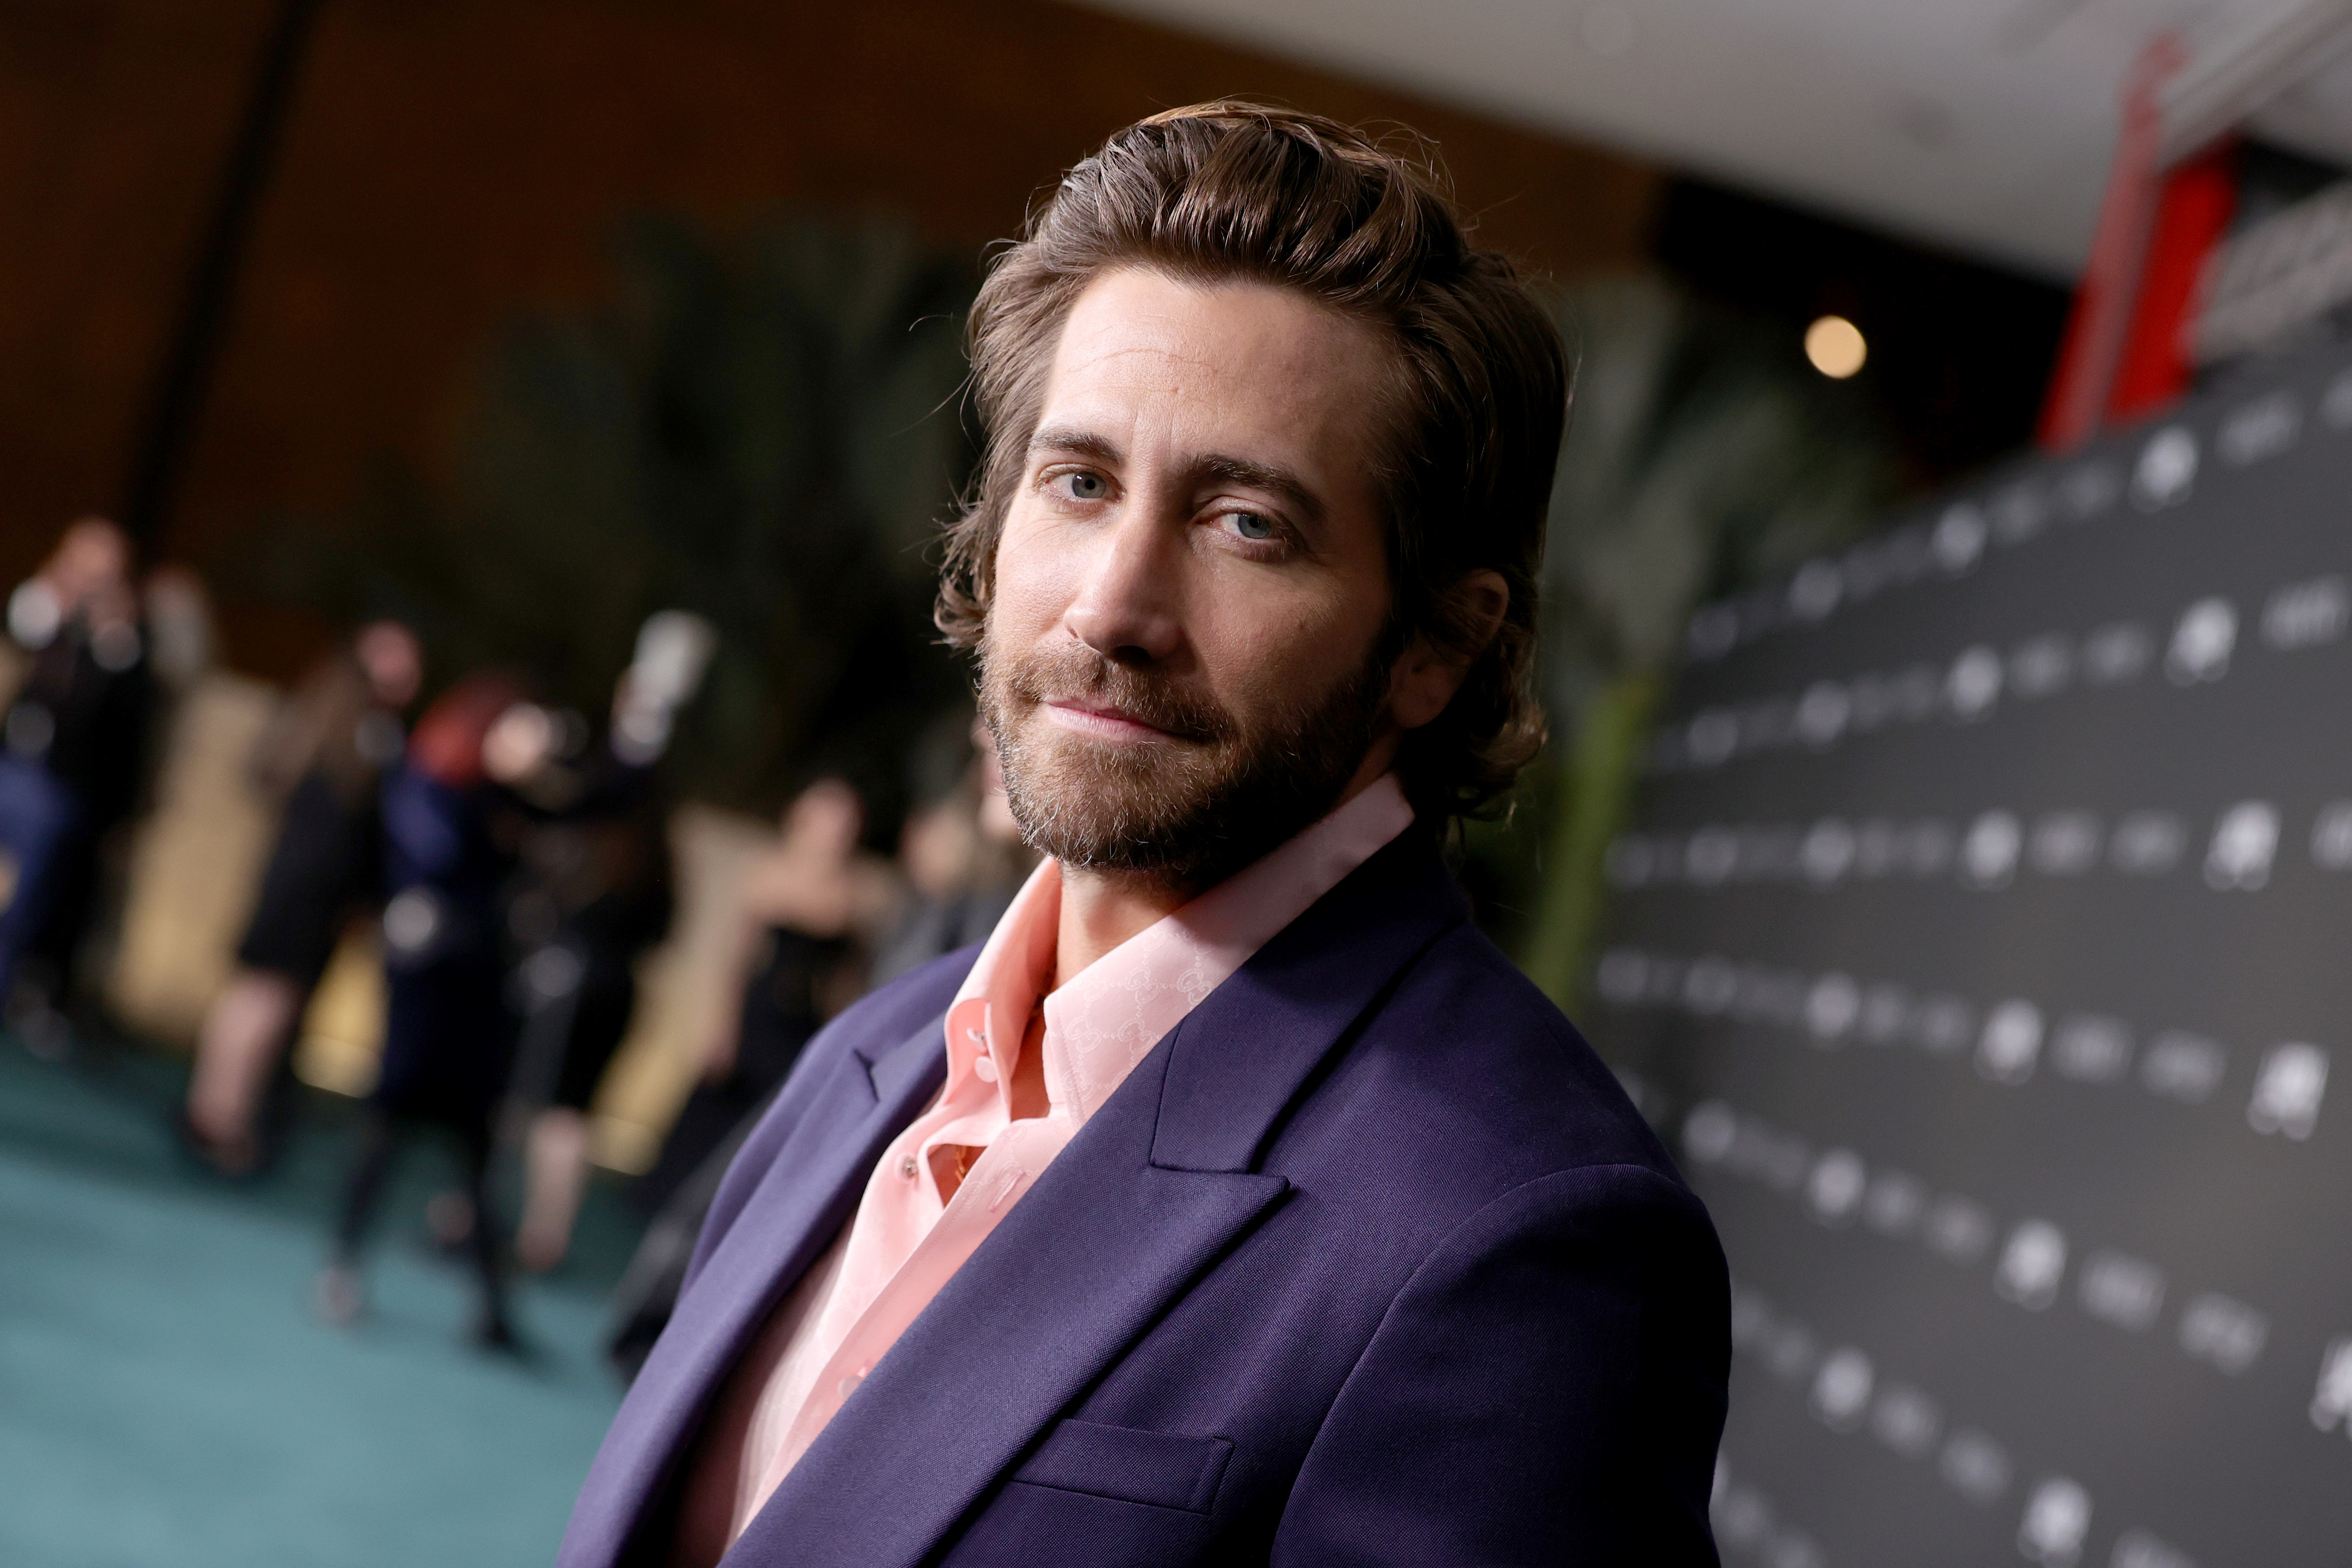 Jake Gyllenhaal on the red carpet of a media event